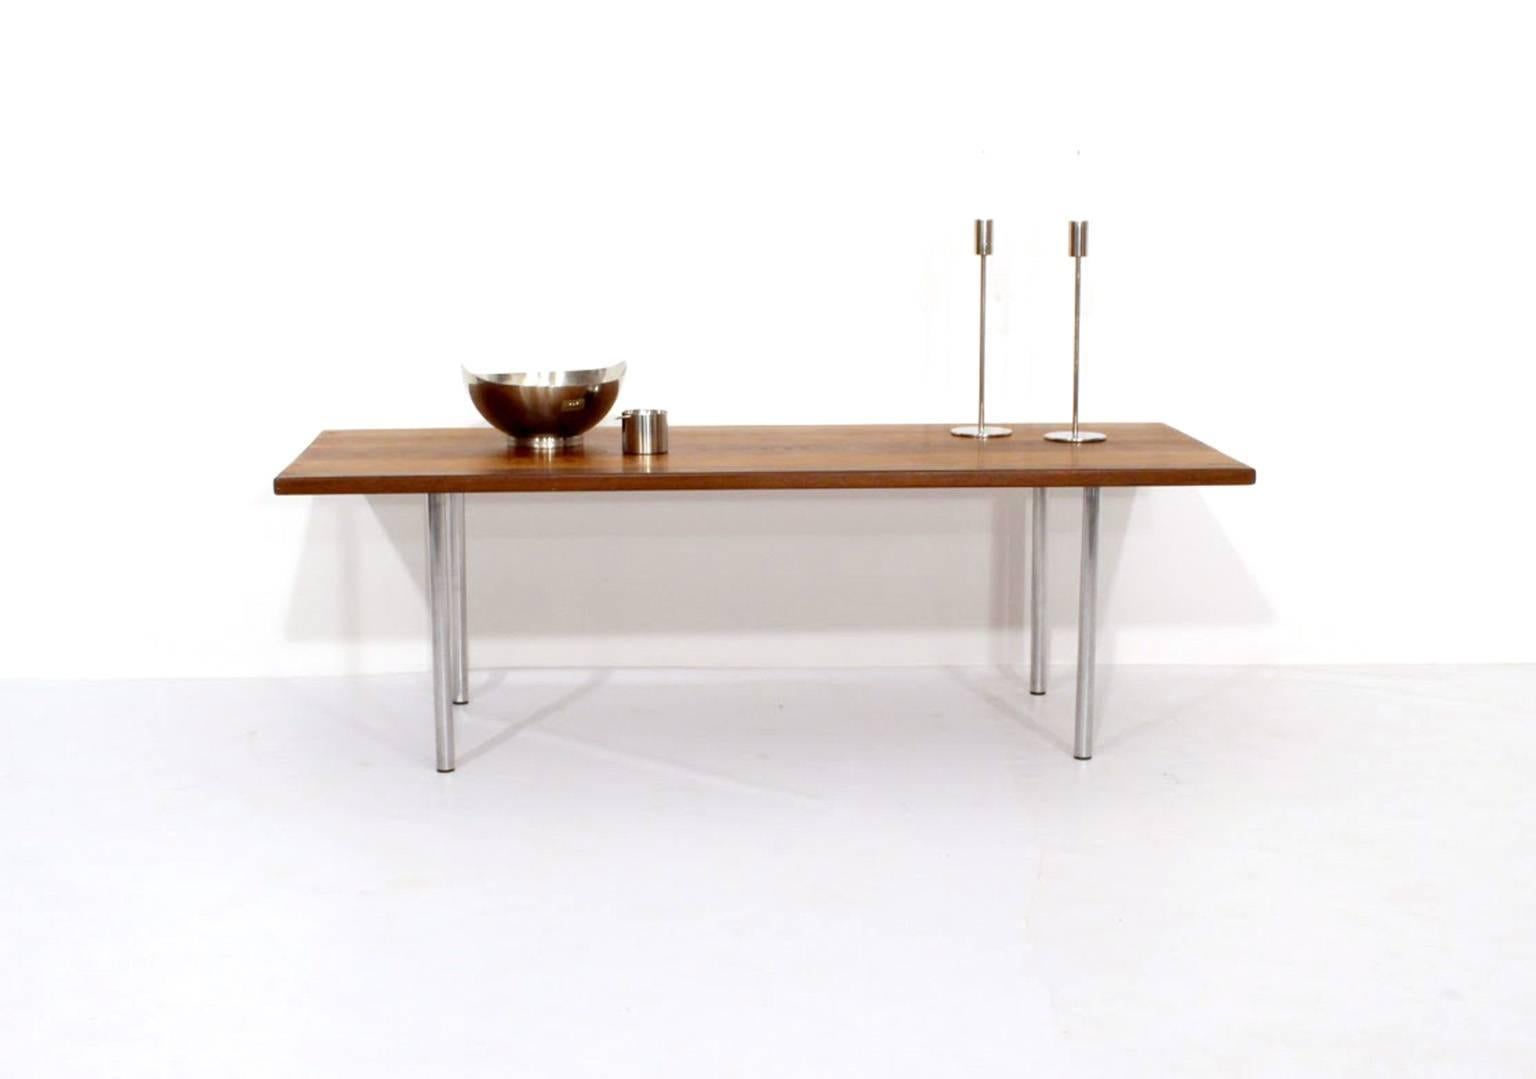 Danish Hans Wegner Coffee Table Model AT 12 in Solid Wengé Wood For Sale